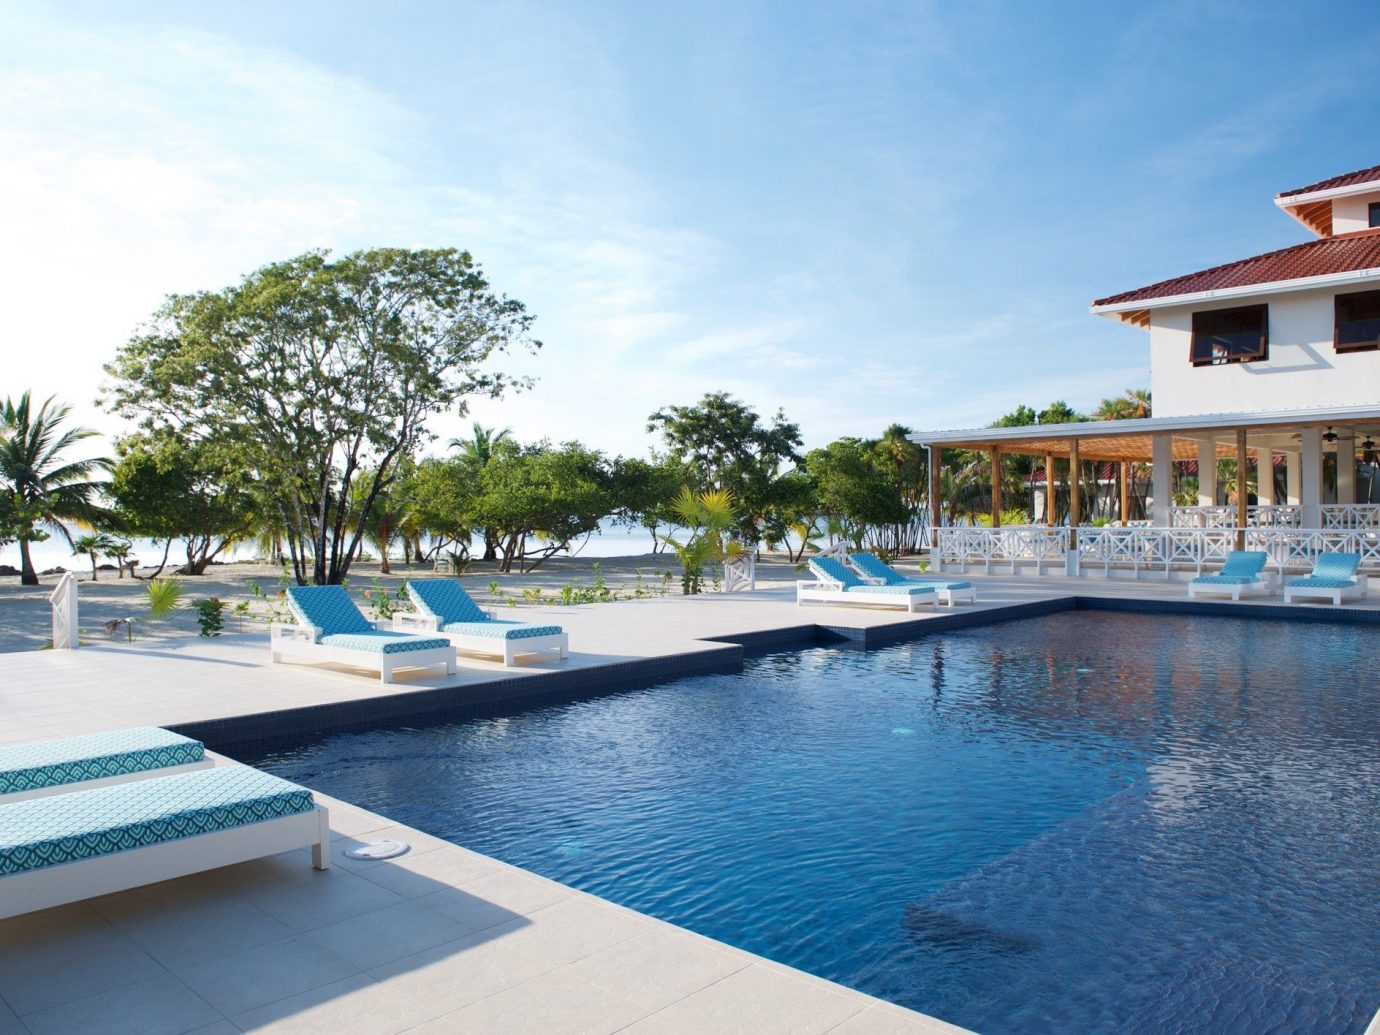 Pool At Naia Resort And Spa In Placencia, Belize